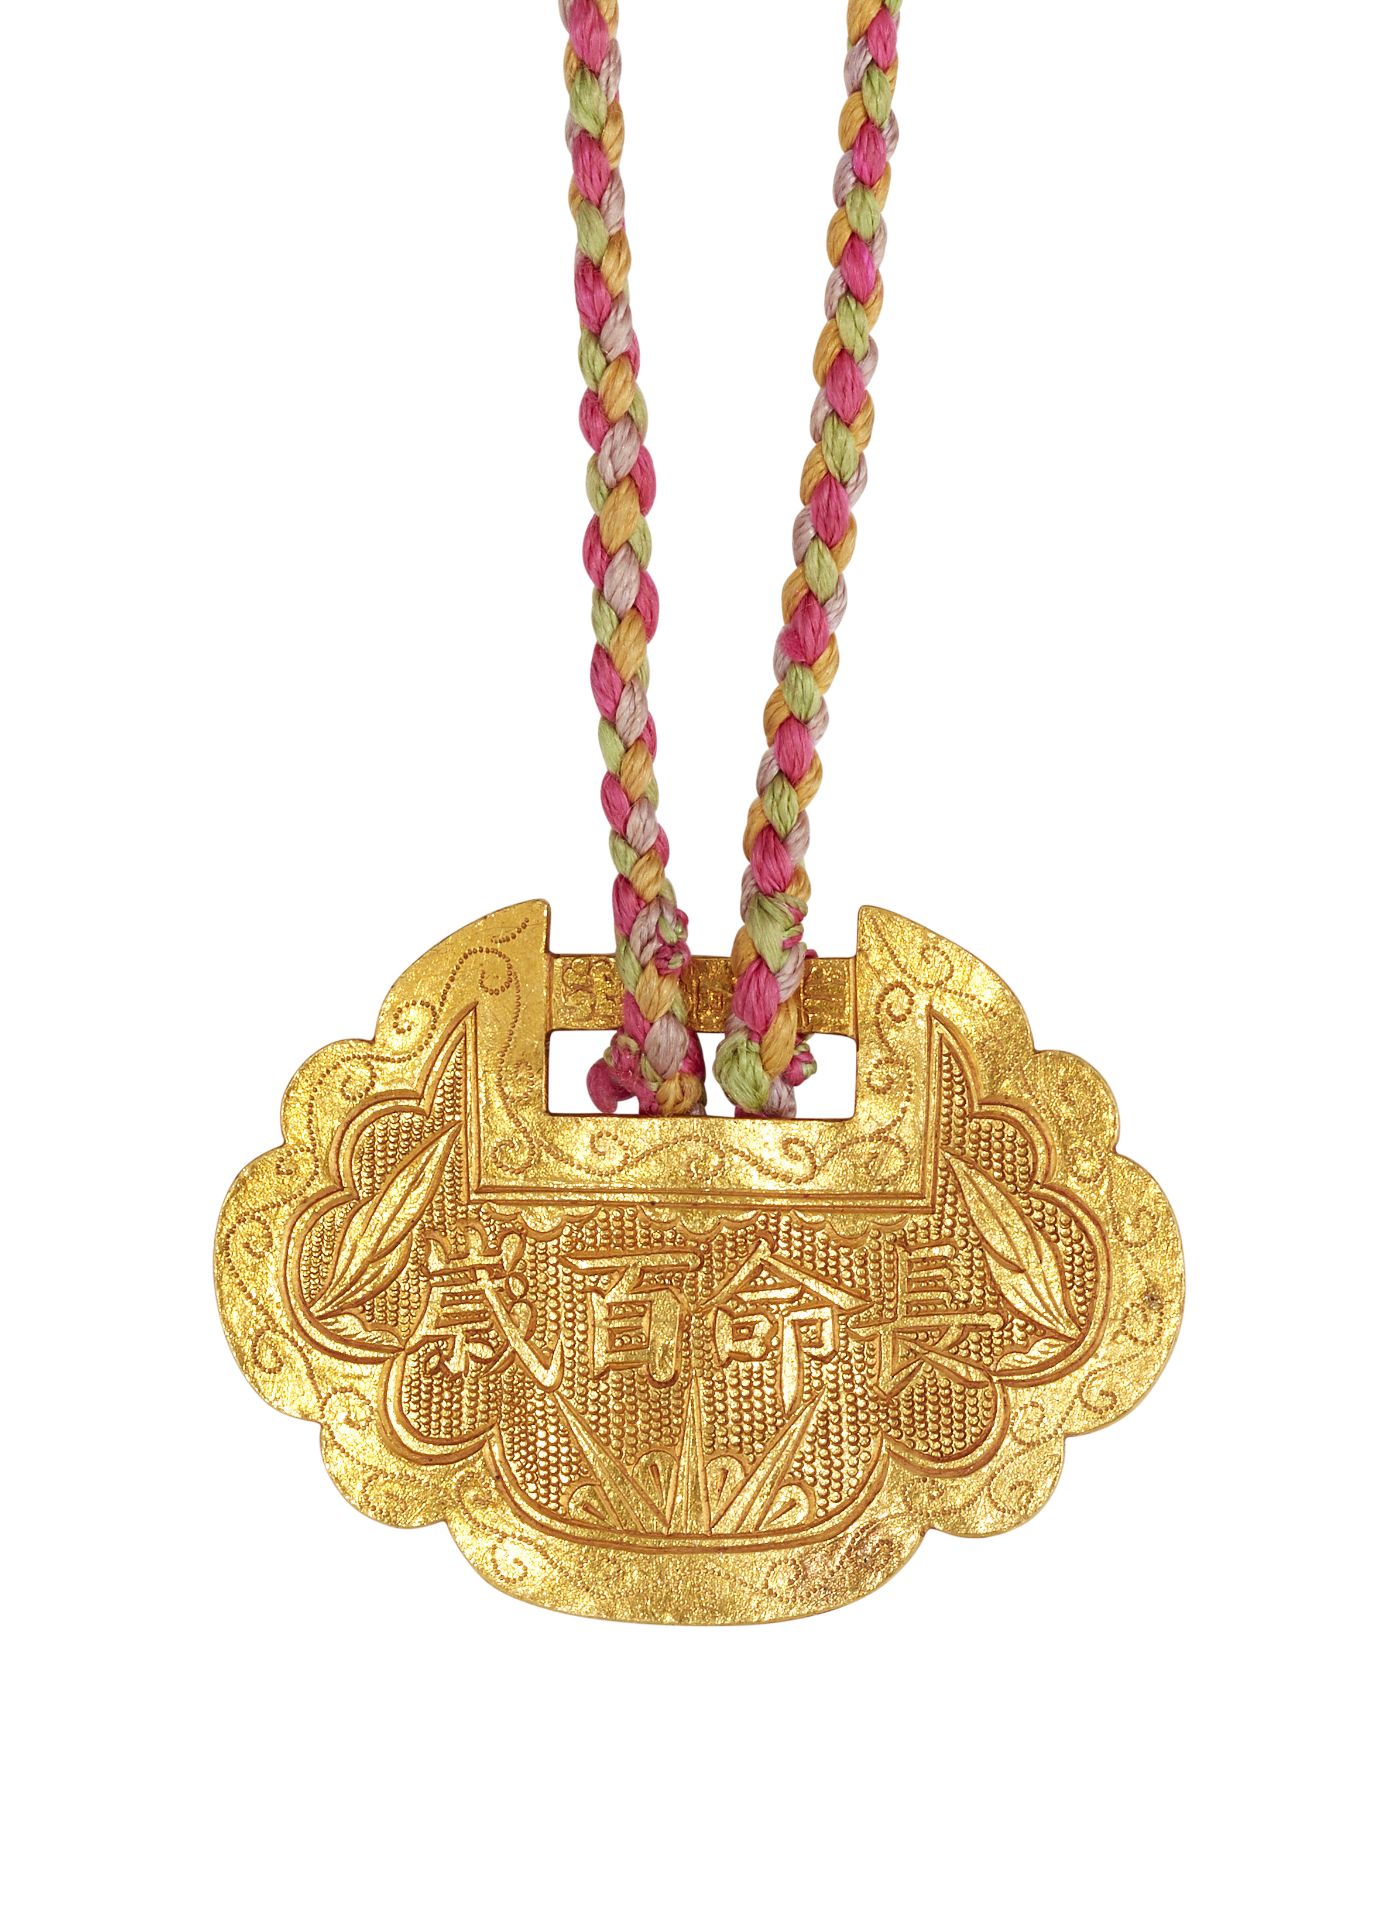 A CHINESE GOLD PENDANT